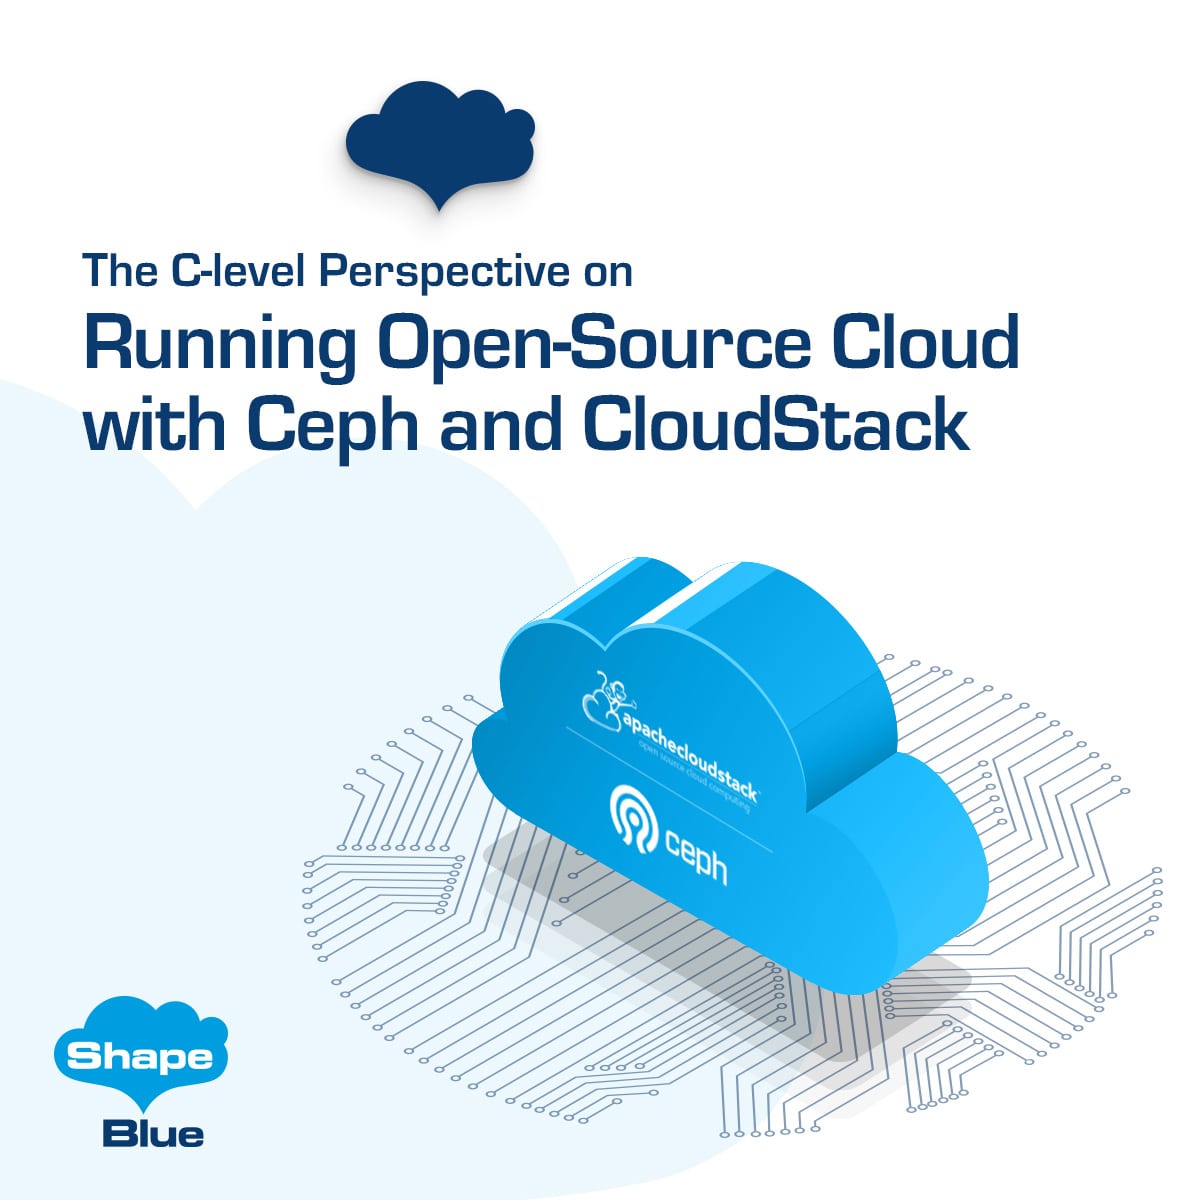 The C-level Perspective on Running Open-Source Cloud with Ceph and CloudStack - Blog